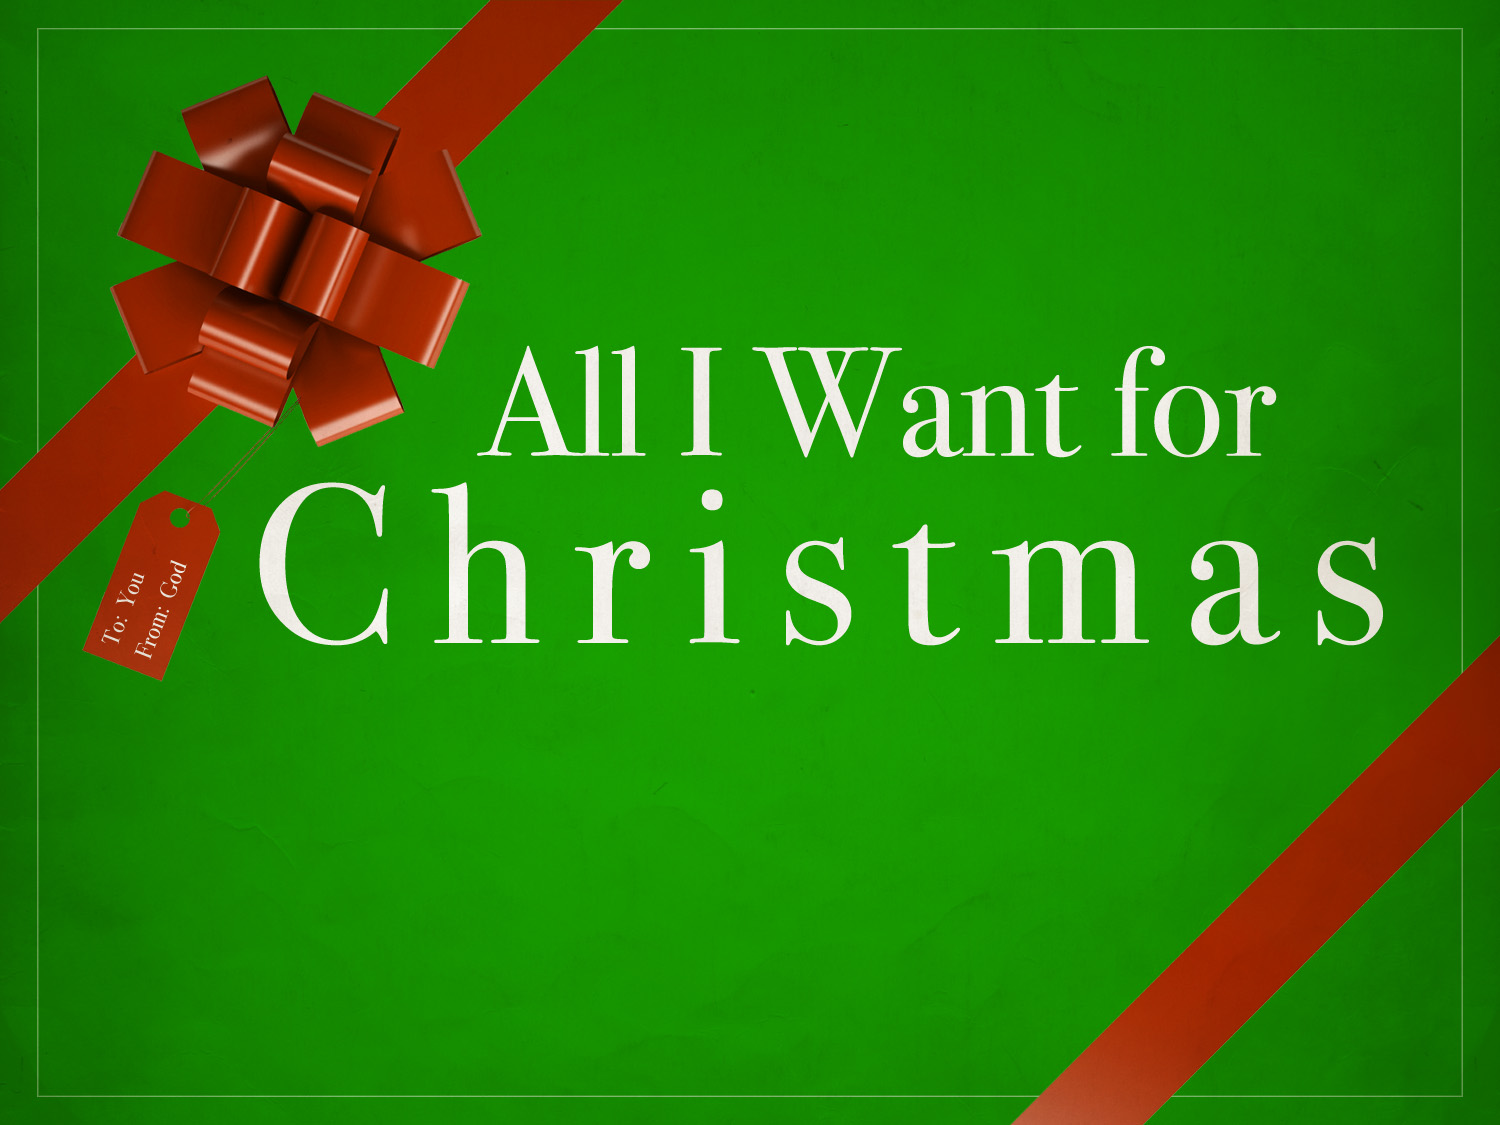 All I Want for Christmas Is You (Vince Vance & The Valiants song)